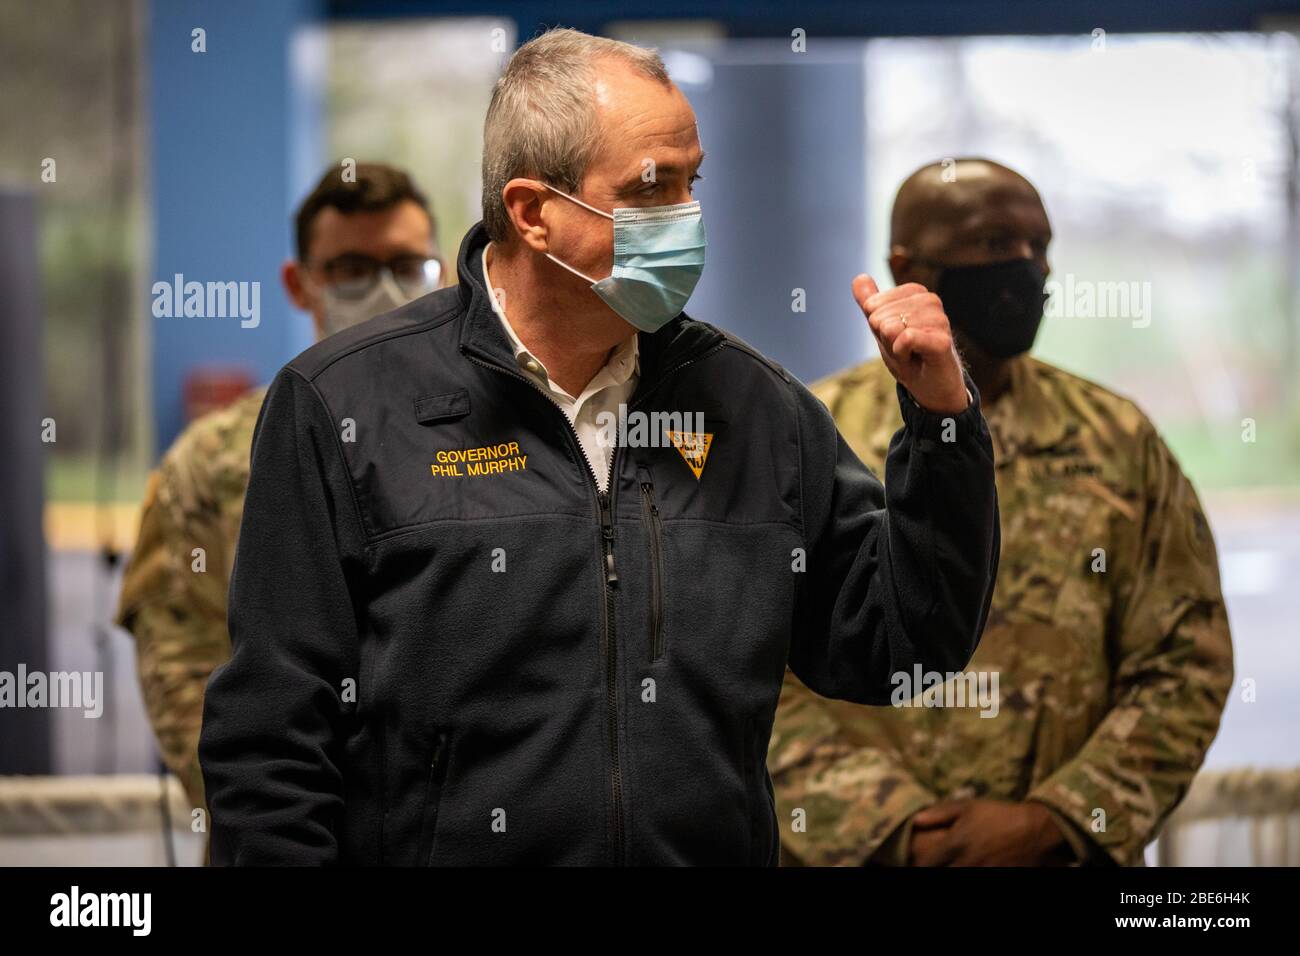 New Jersey Gov. Phil Murphy takes a tour of a Field Medical Station for treating COVID-19 patients at the New Jersey Convention and Exposition Center April 8, 2020 in Edison, New Jersey. Stock Photo